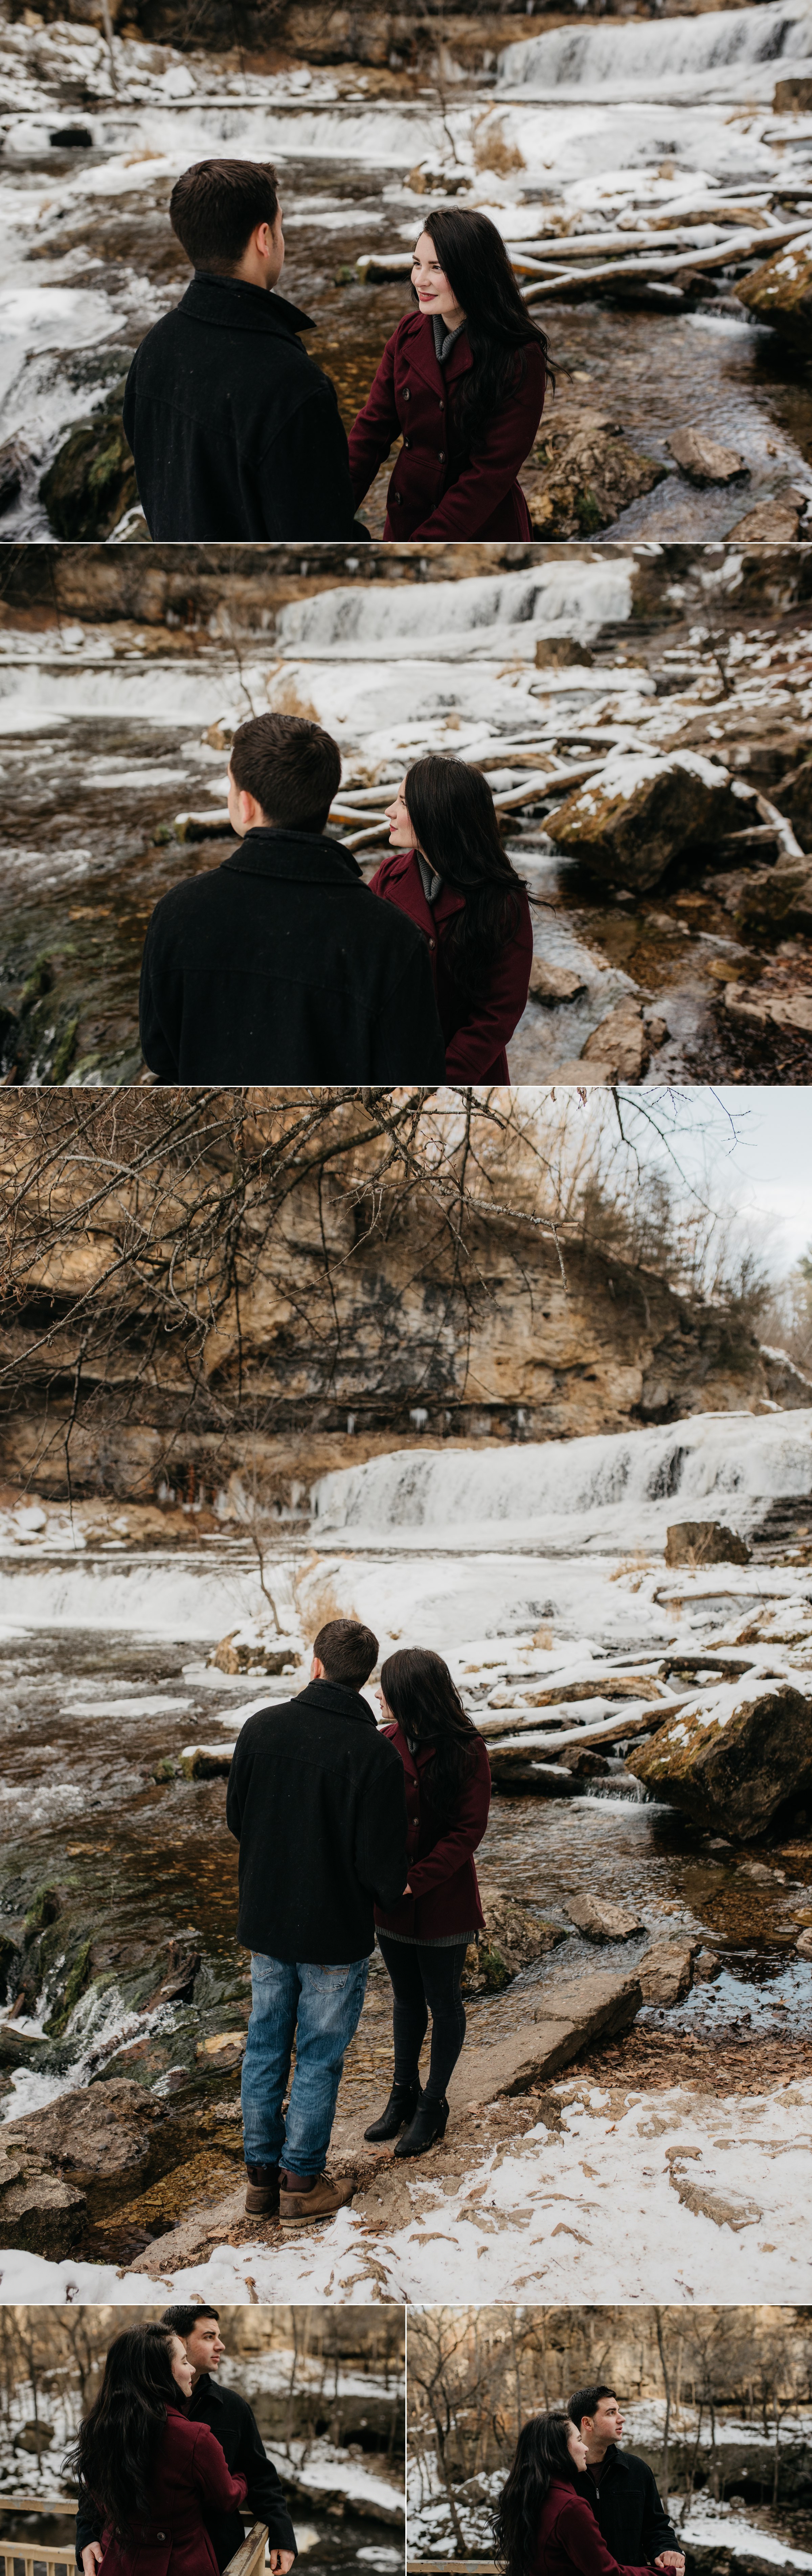 austin-minneapolis-elopement-photographer-willow-river-spain-france-costa-rica-best-family-affordable_0030.jpg